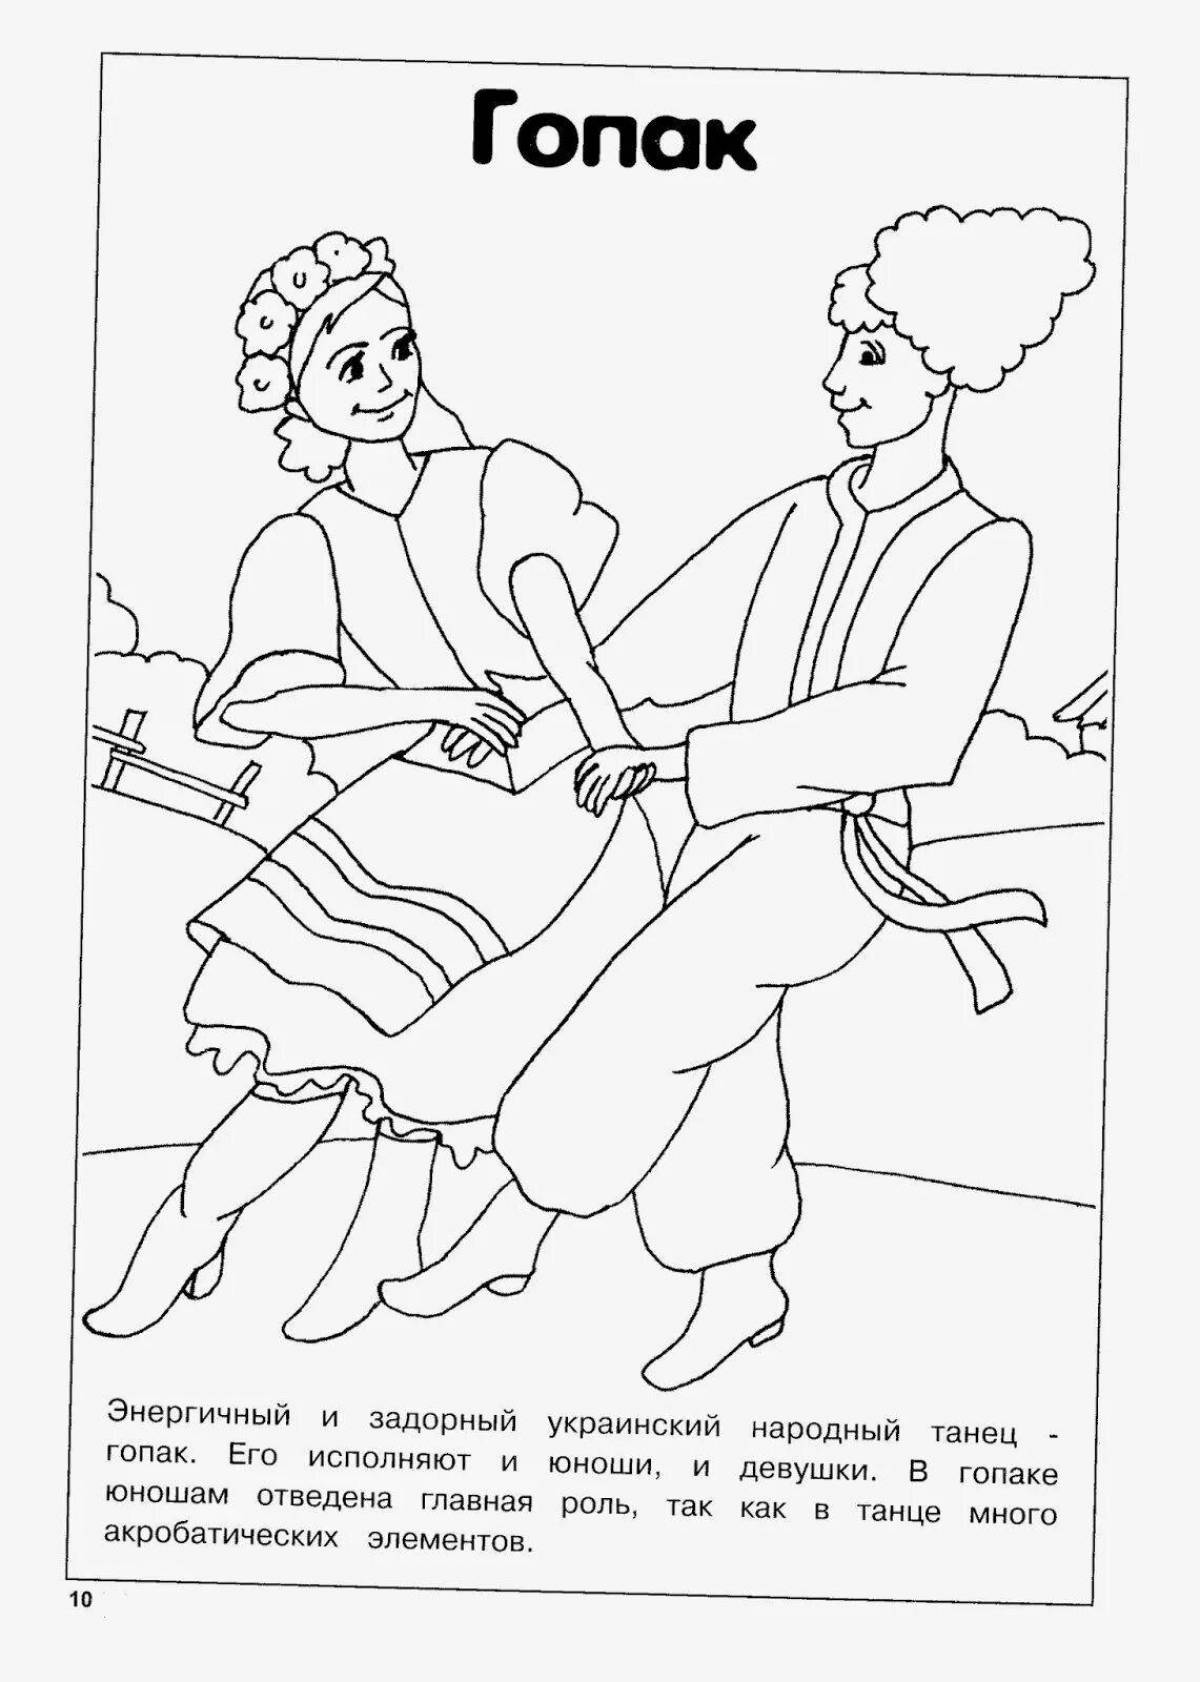 Colorful polka dance coloring page